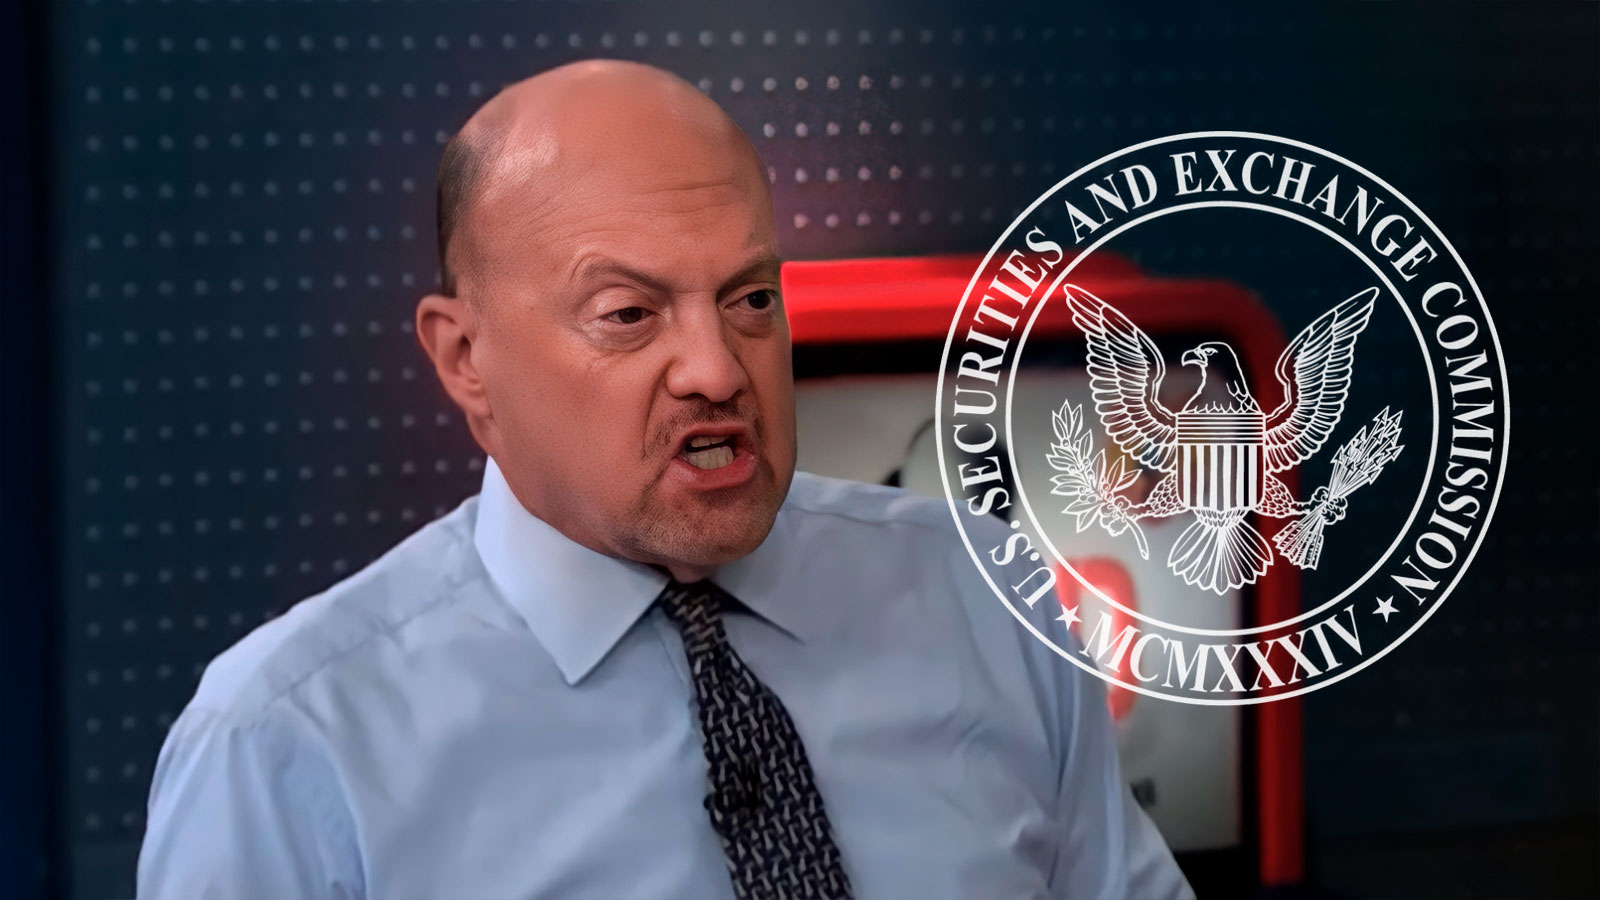 Jim Cramer Urges SEC to Crack Down on Crypto Pump-and-Dumps